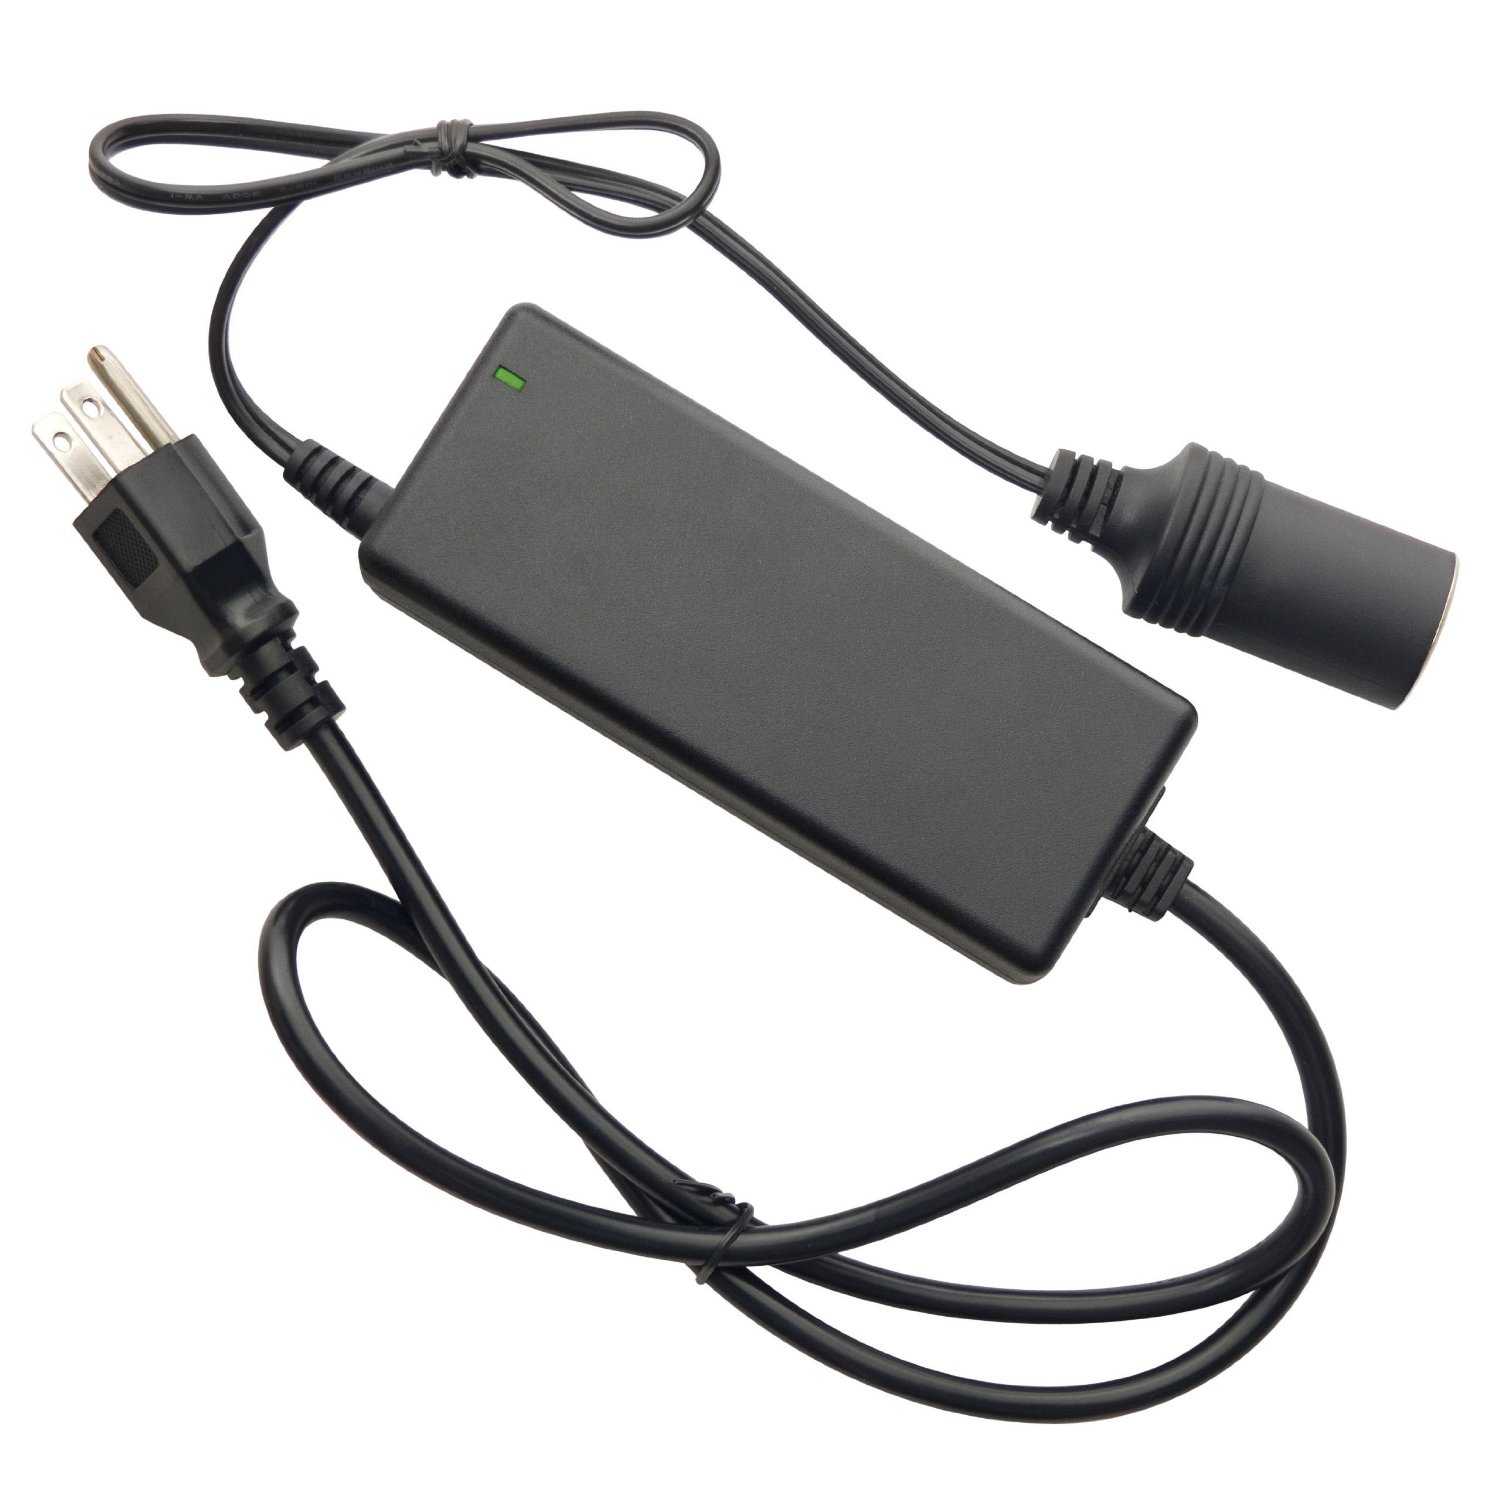 AC to 12V DC Power Adapter